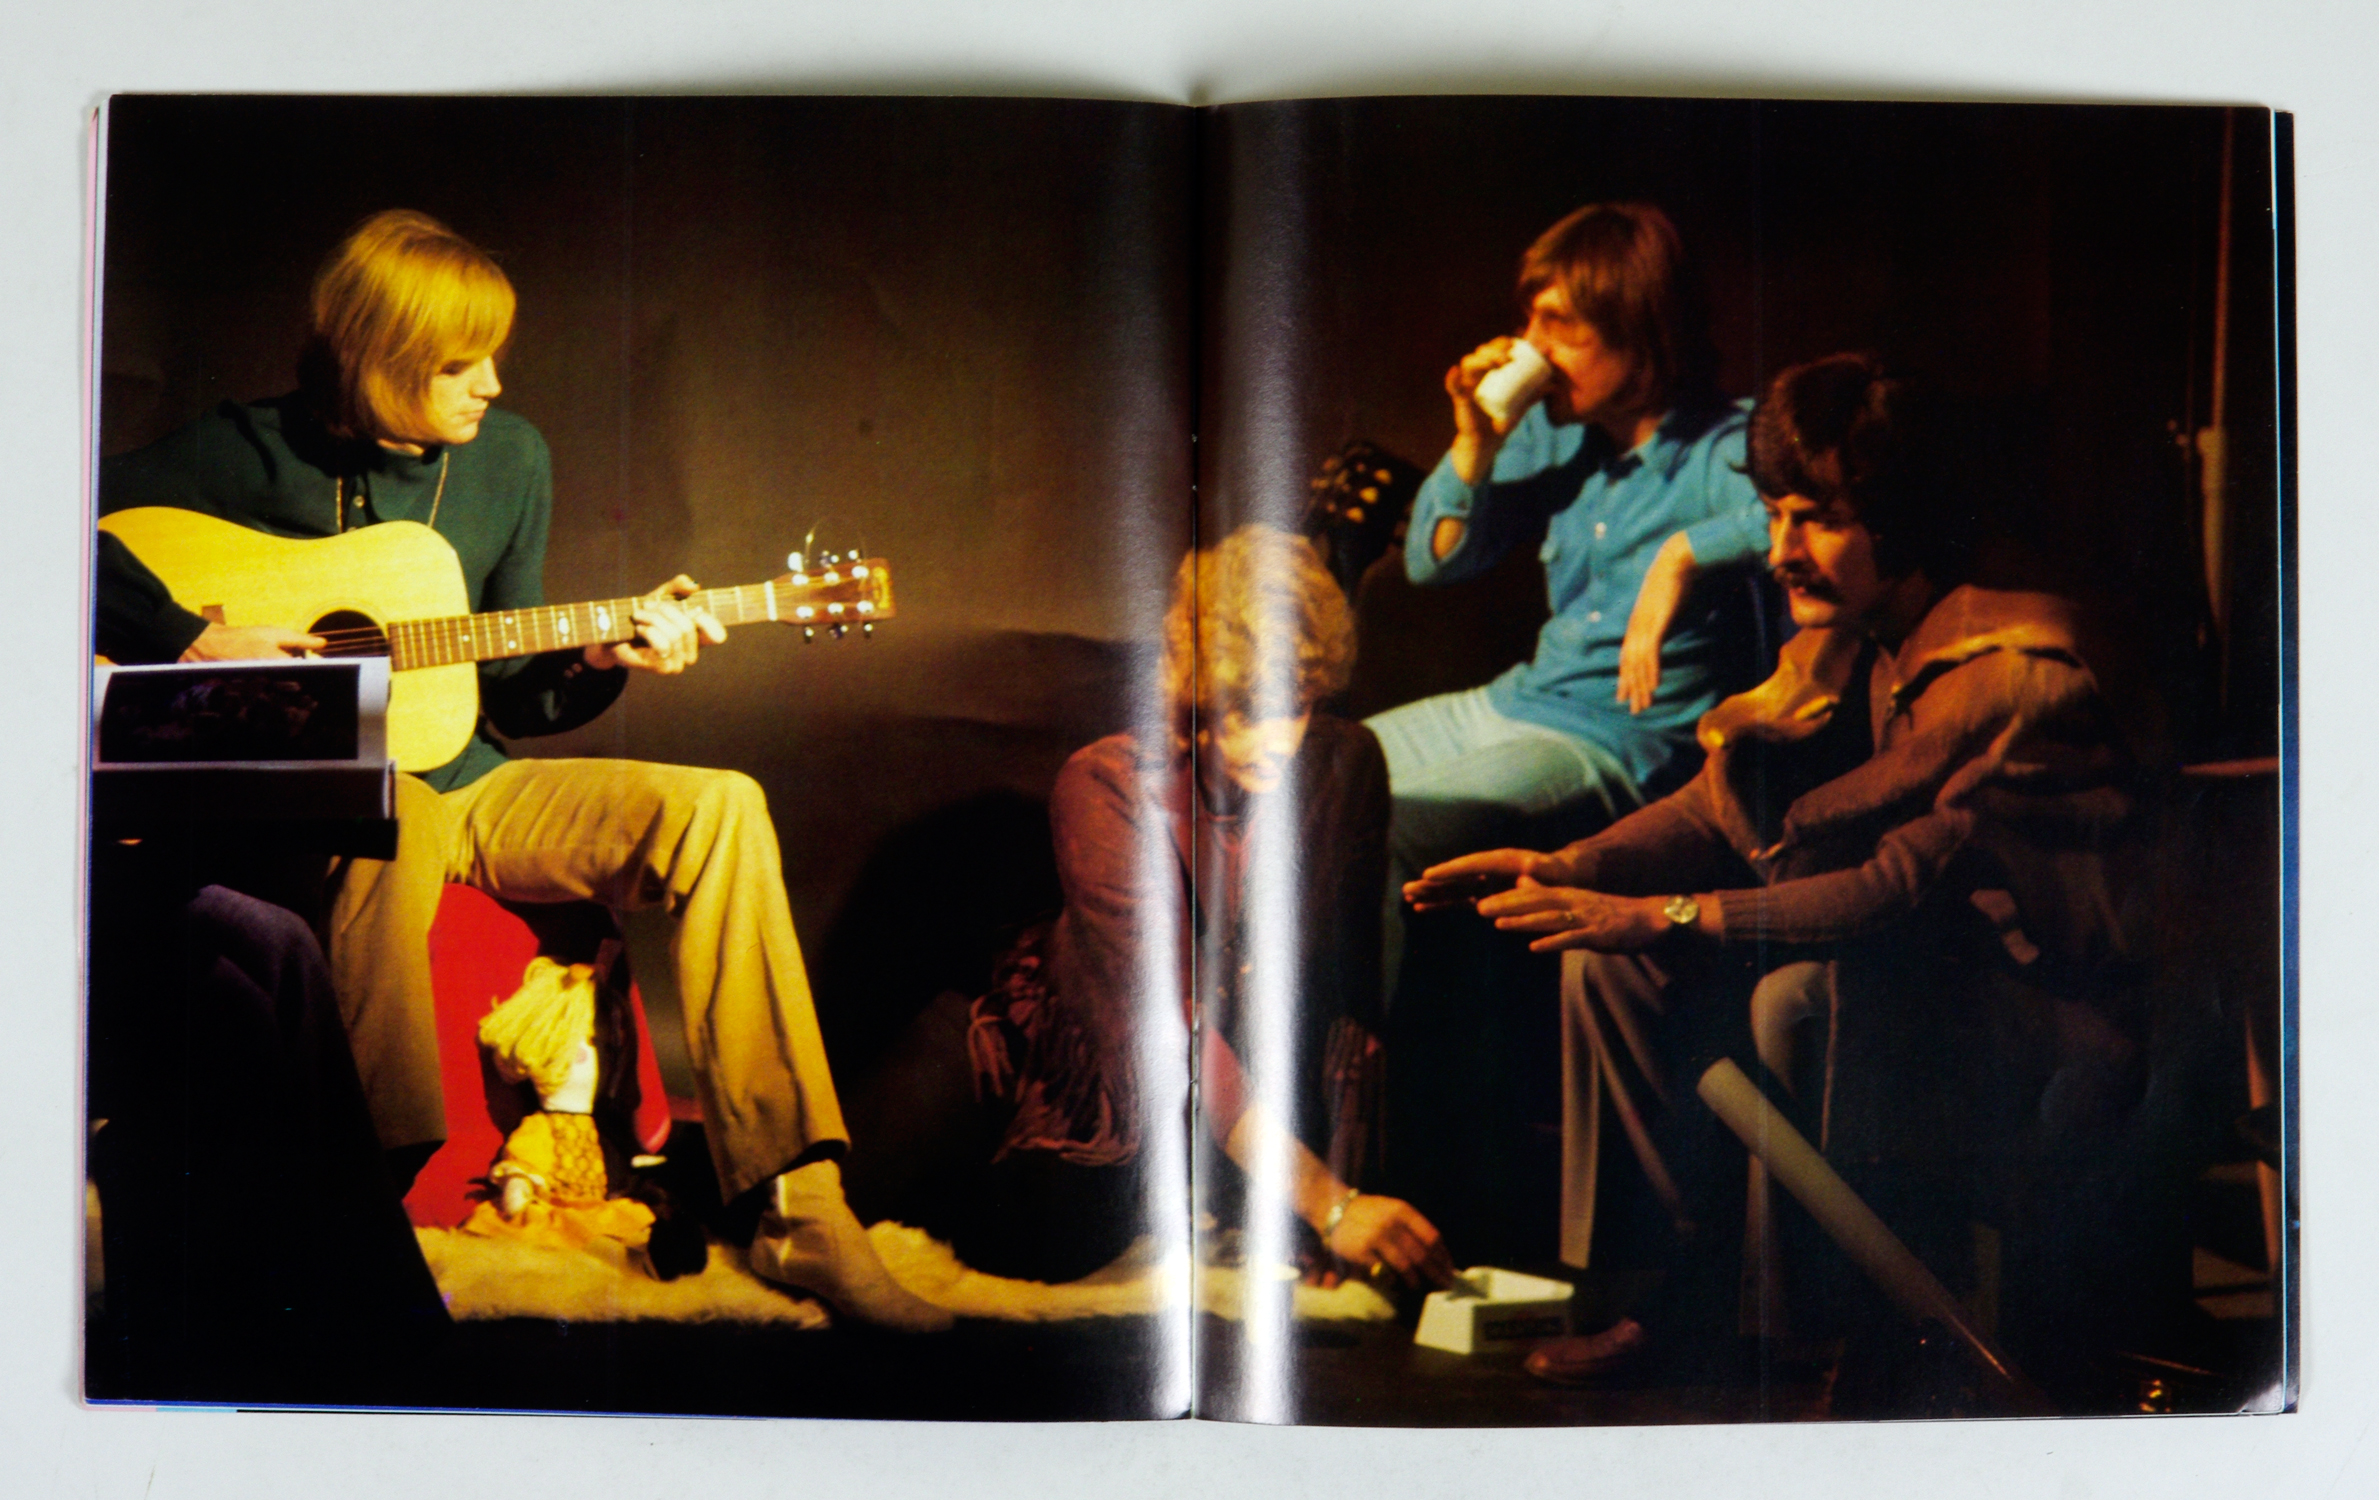 The Moody Blues Program Book 1978 Octave Tour 